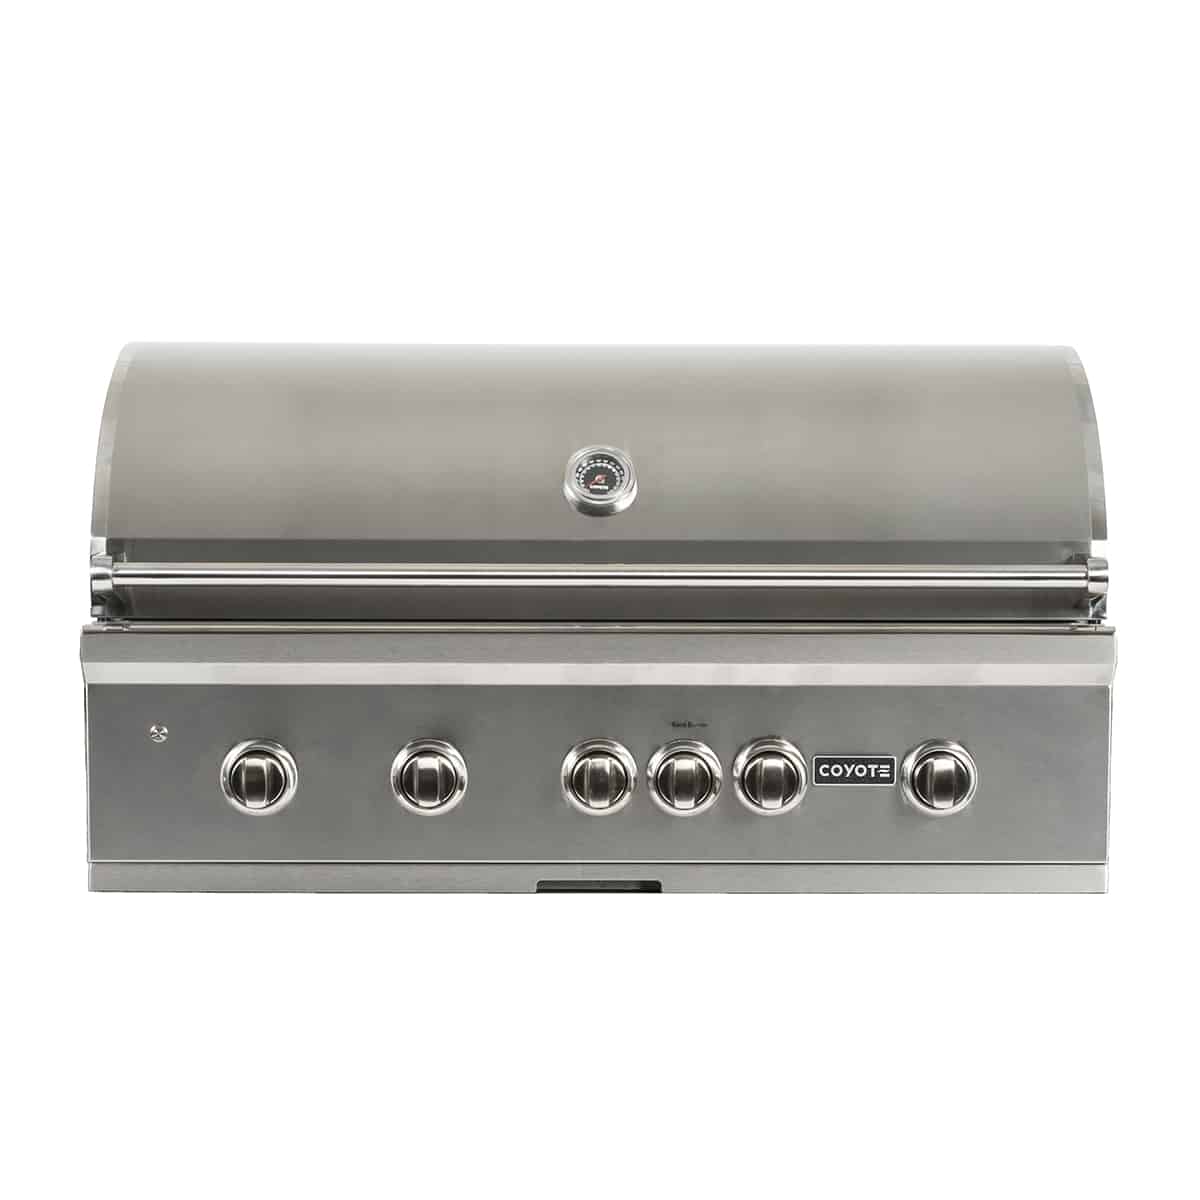 Coyote S-Series 42 Inch Built-In 5-Burner Grill with LED Lights and Rapidsear Infrared Burner Front Hood Cover Closed